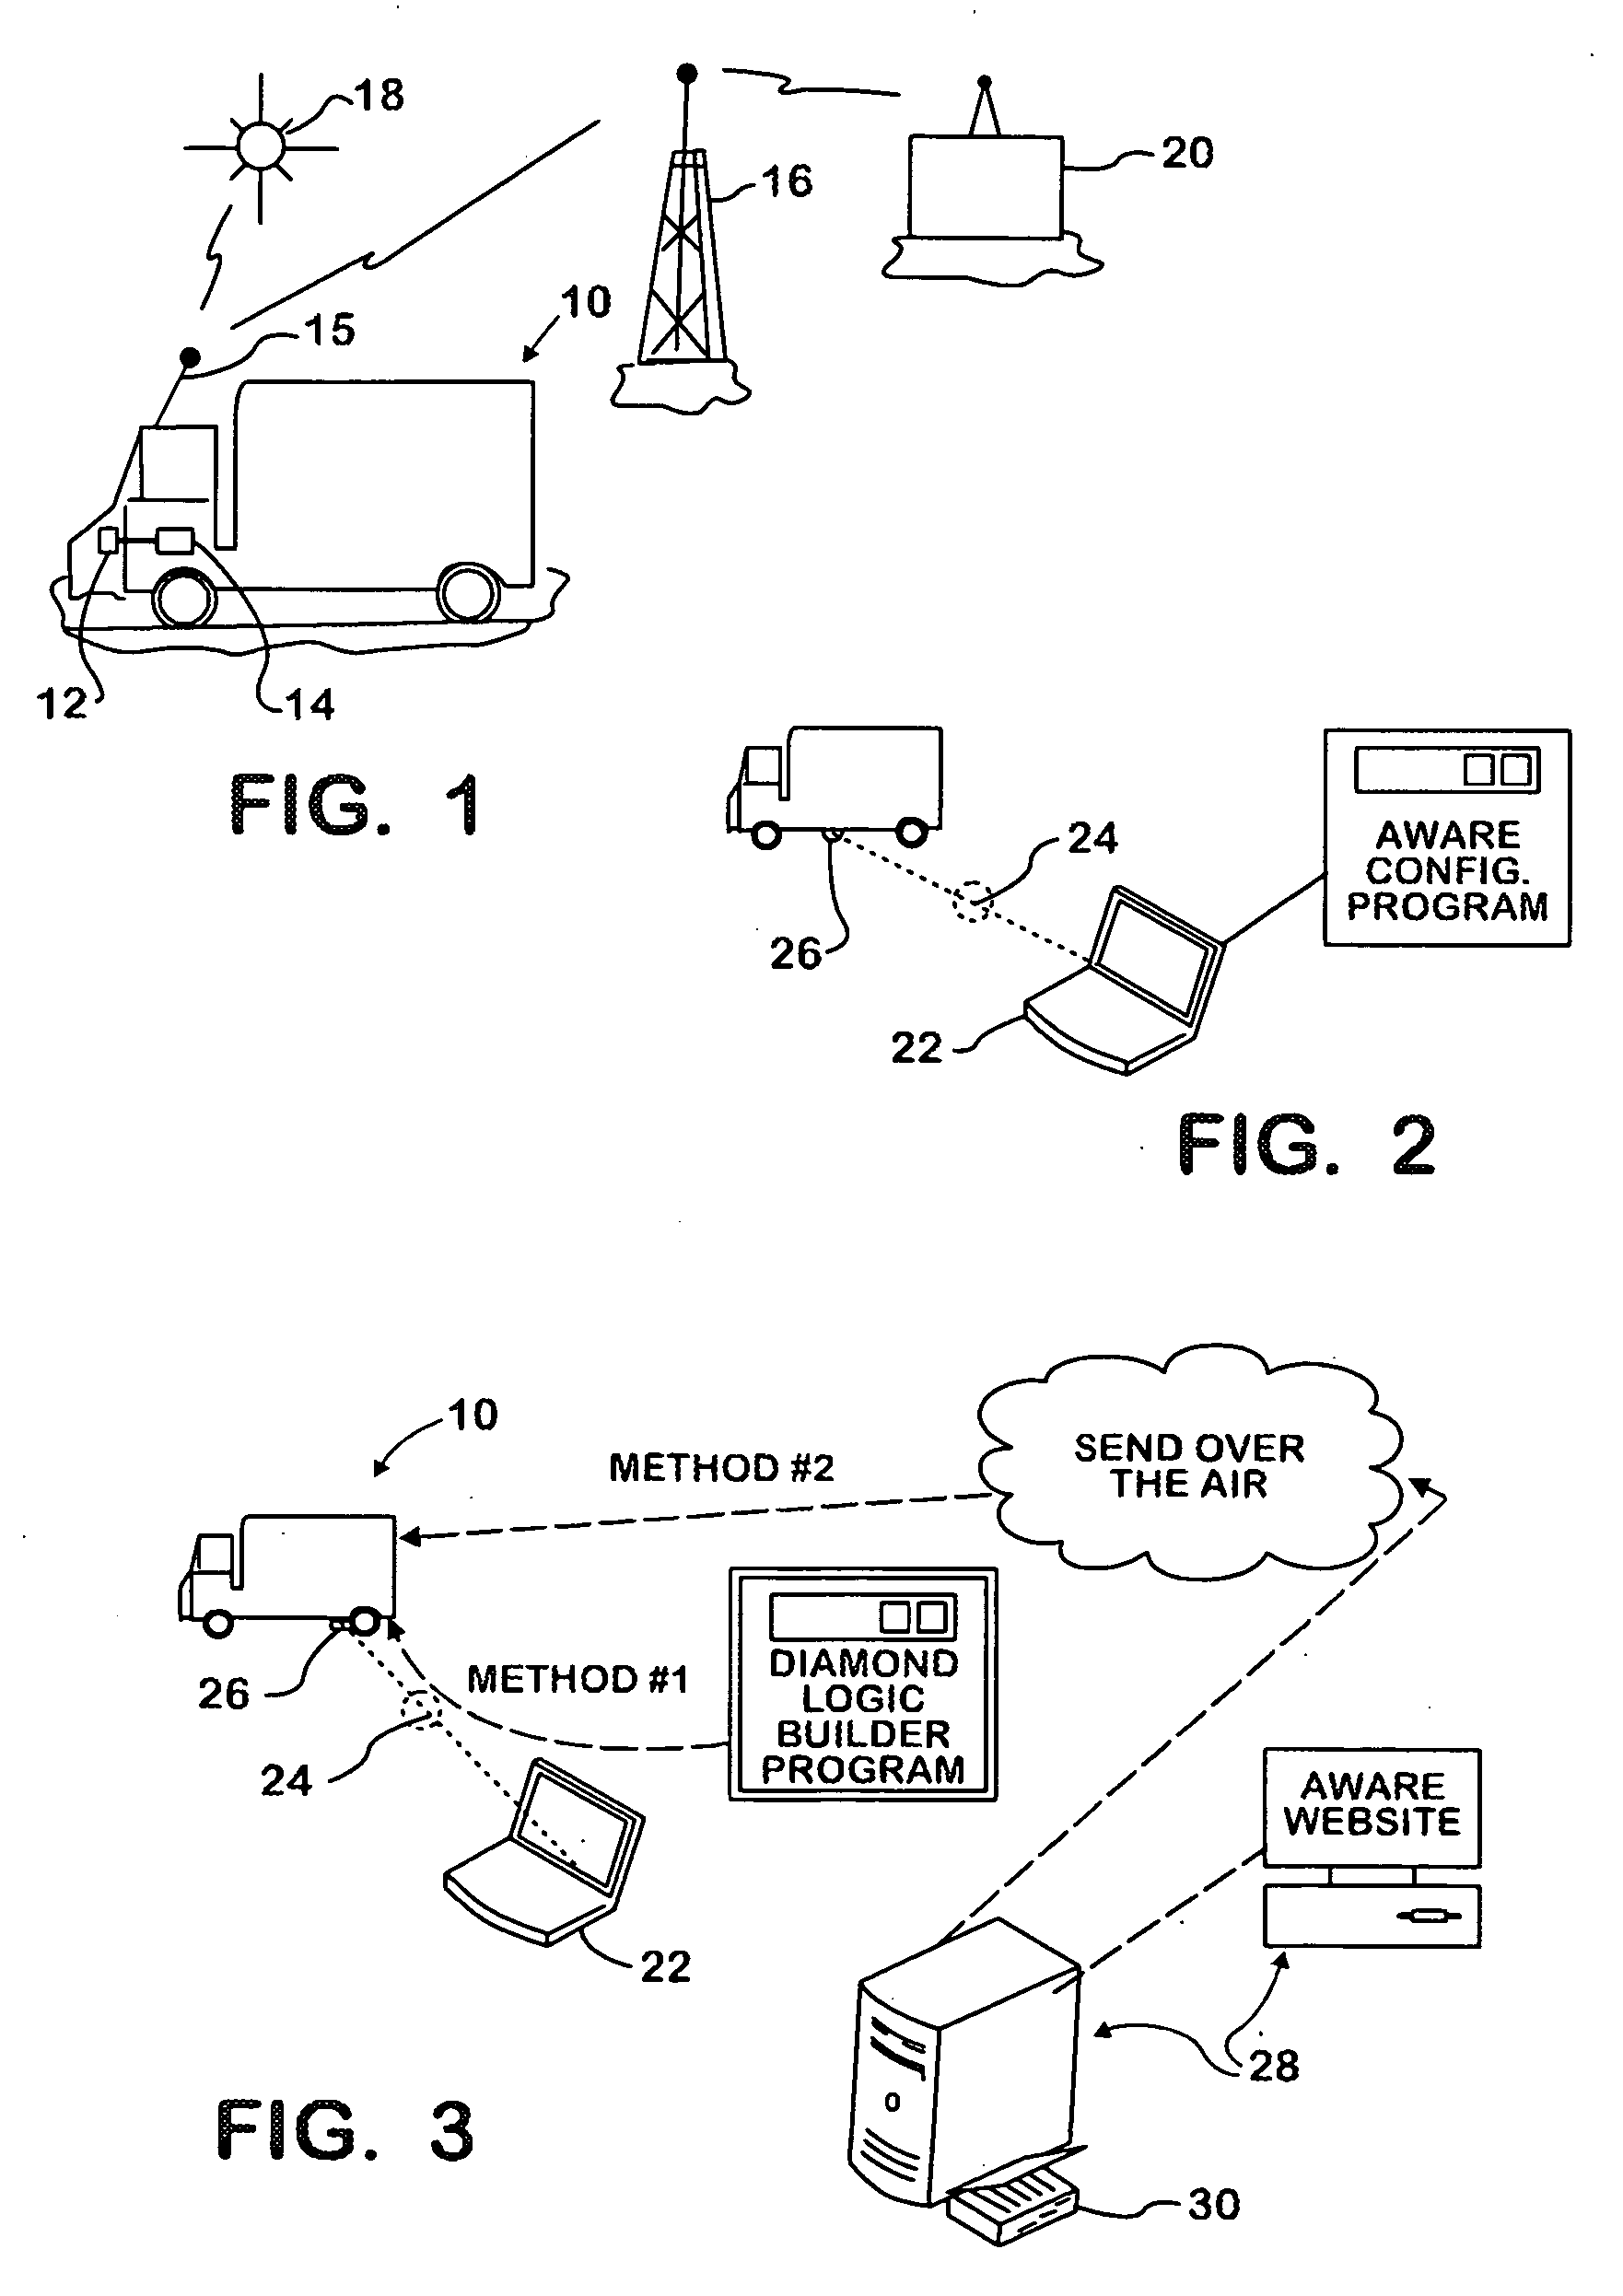 Compiling Source Information From A Motor Vehicle Data System and Configuring A Telematic Module